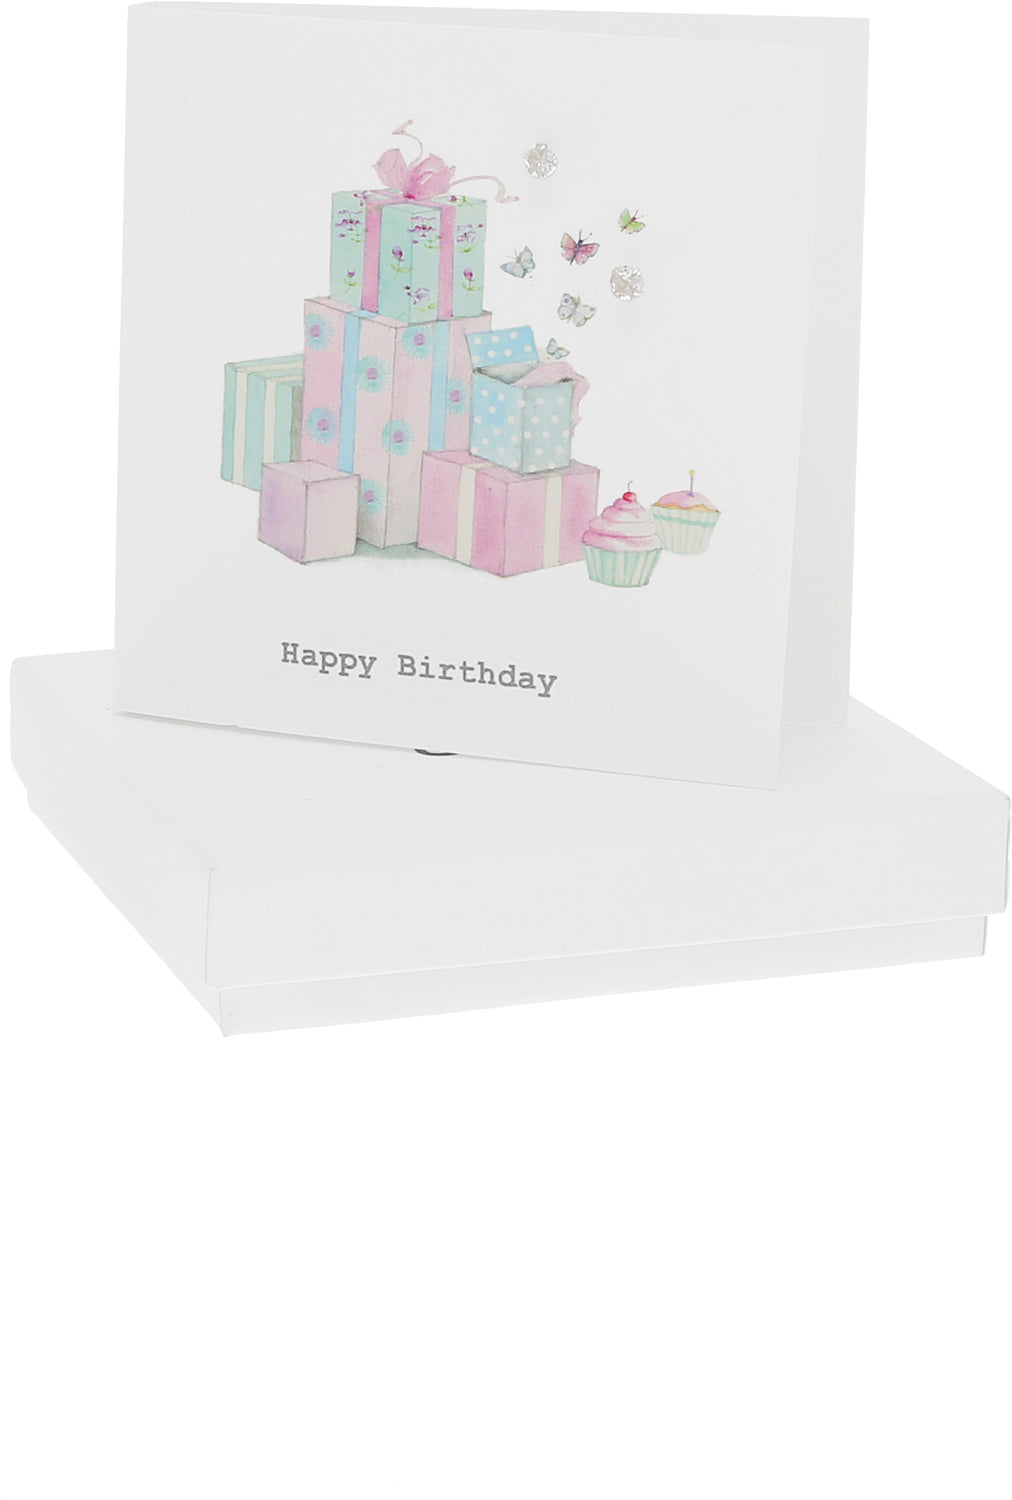 Birthday Presents Gift Card with Sterling Silver and Cubic Zirconial Earrings